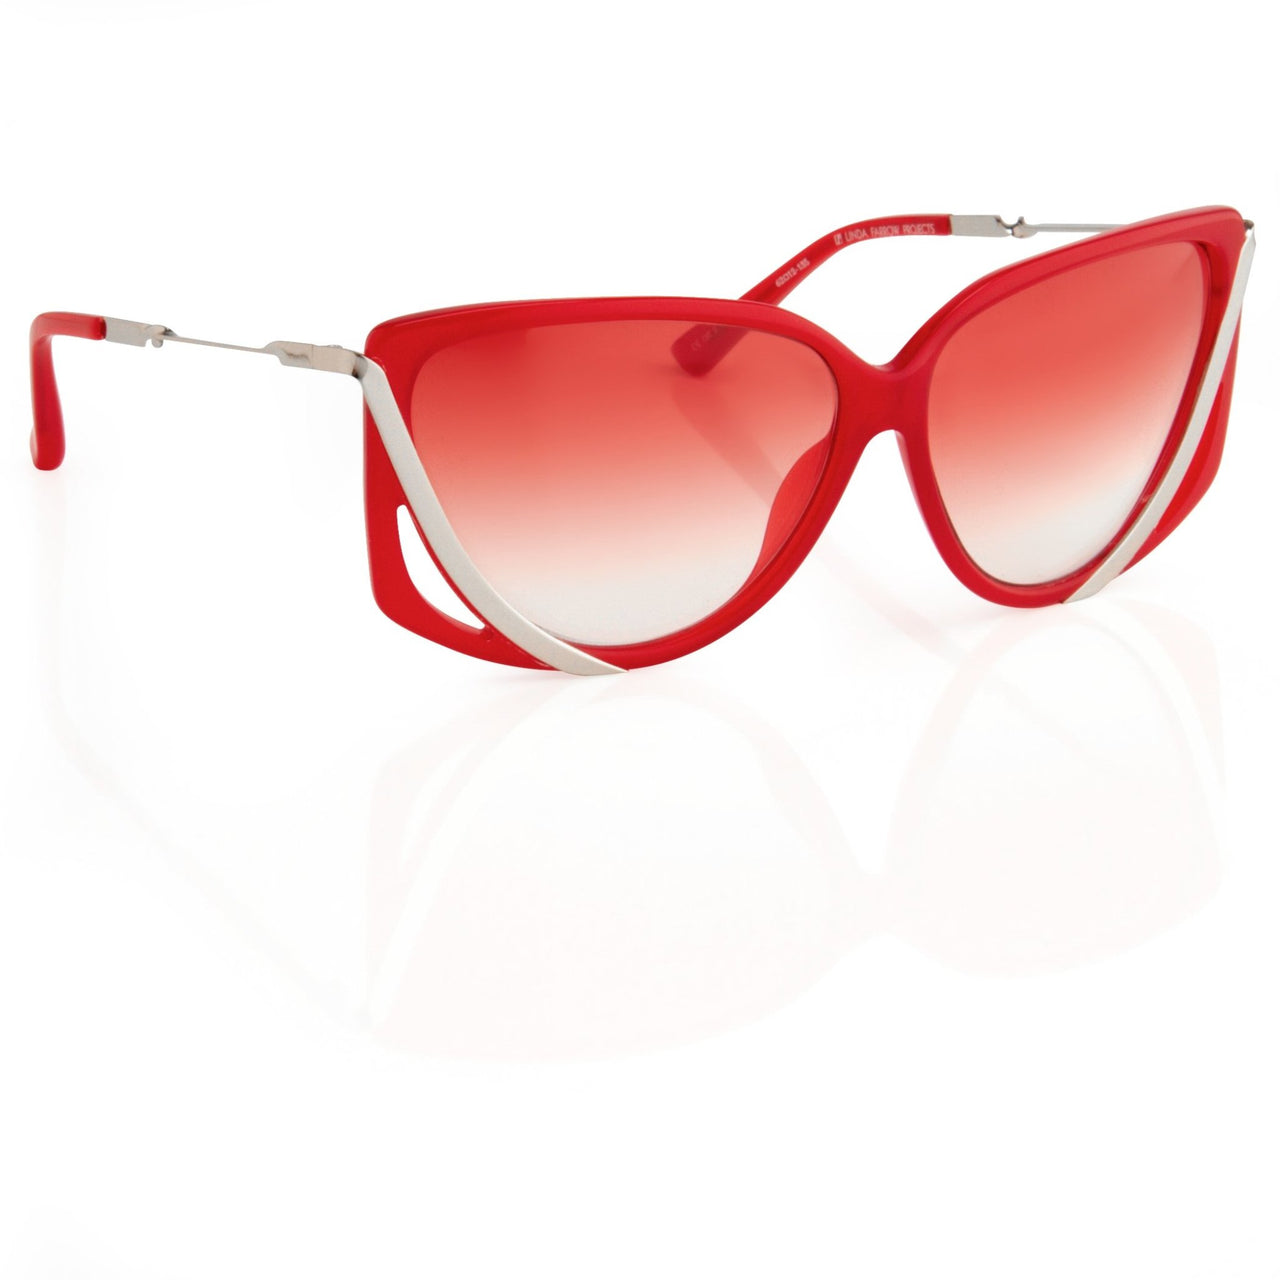 Prabal Gurung Sunglasses Rectangular Red Cut Out With Red Graduated Lenses PG4C3SUN - Watches & Crystals